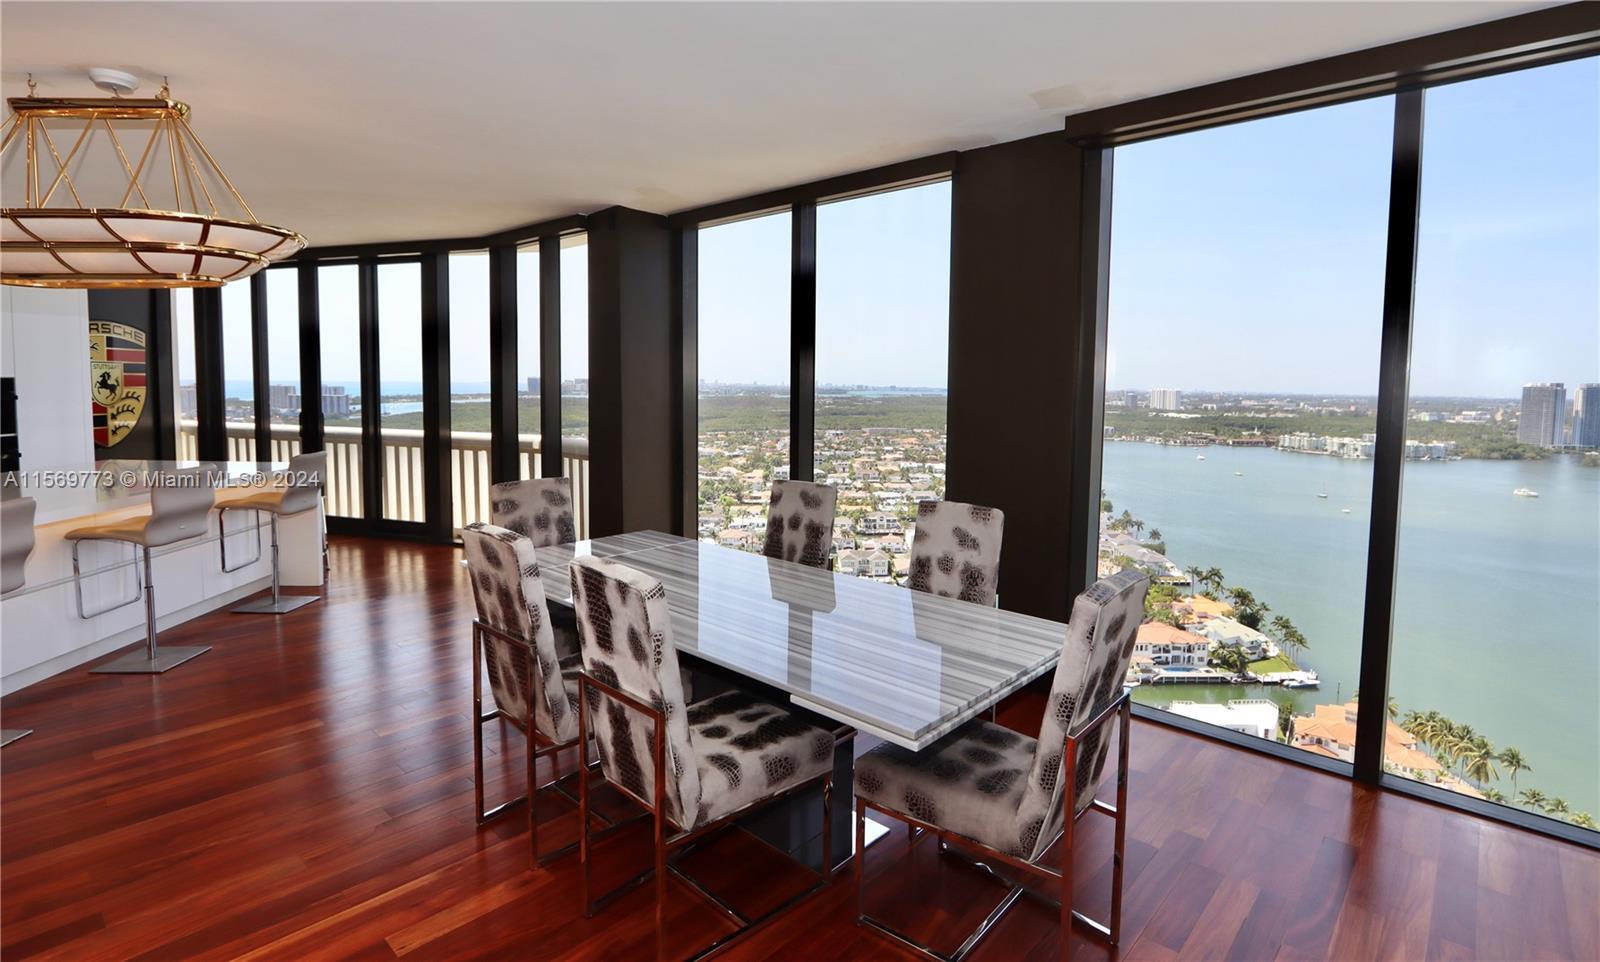 BEAUTIFUL PENTHOUSE RESIDENCE. UNOBSTRUCTED OCEAN, INTRACOASTAL AND CITY VIEWS FROM EVERY ROOM . TOT